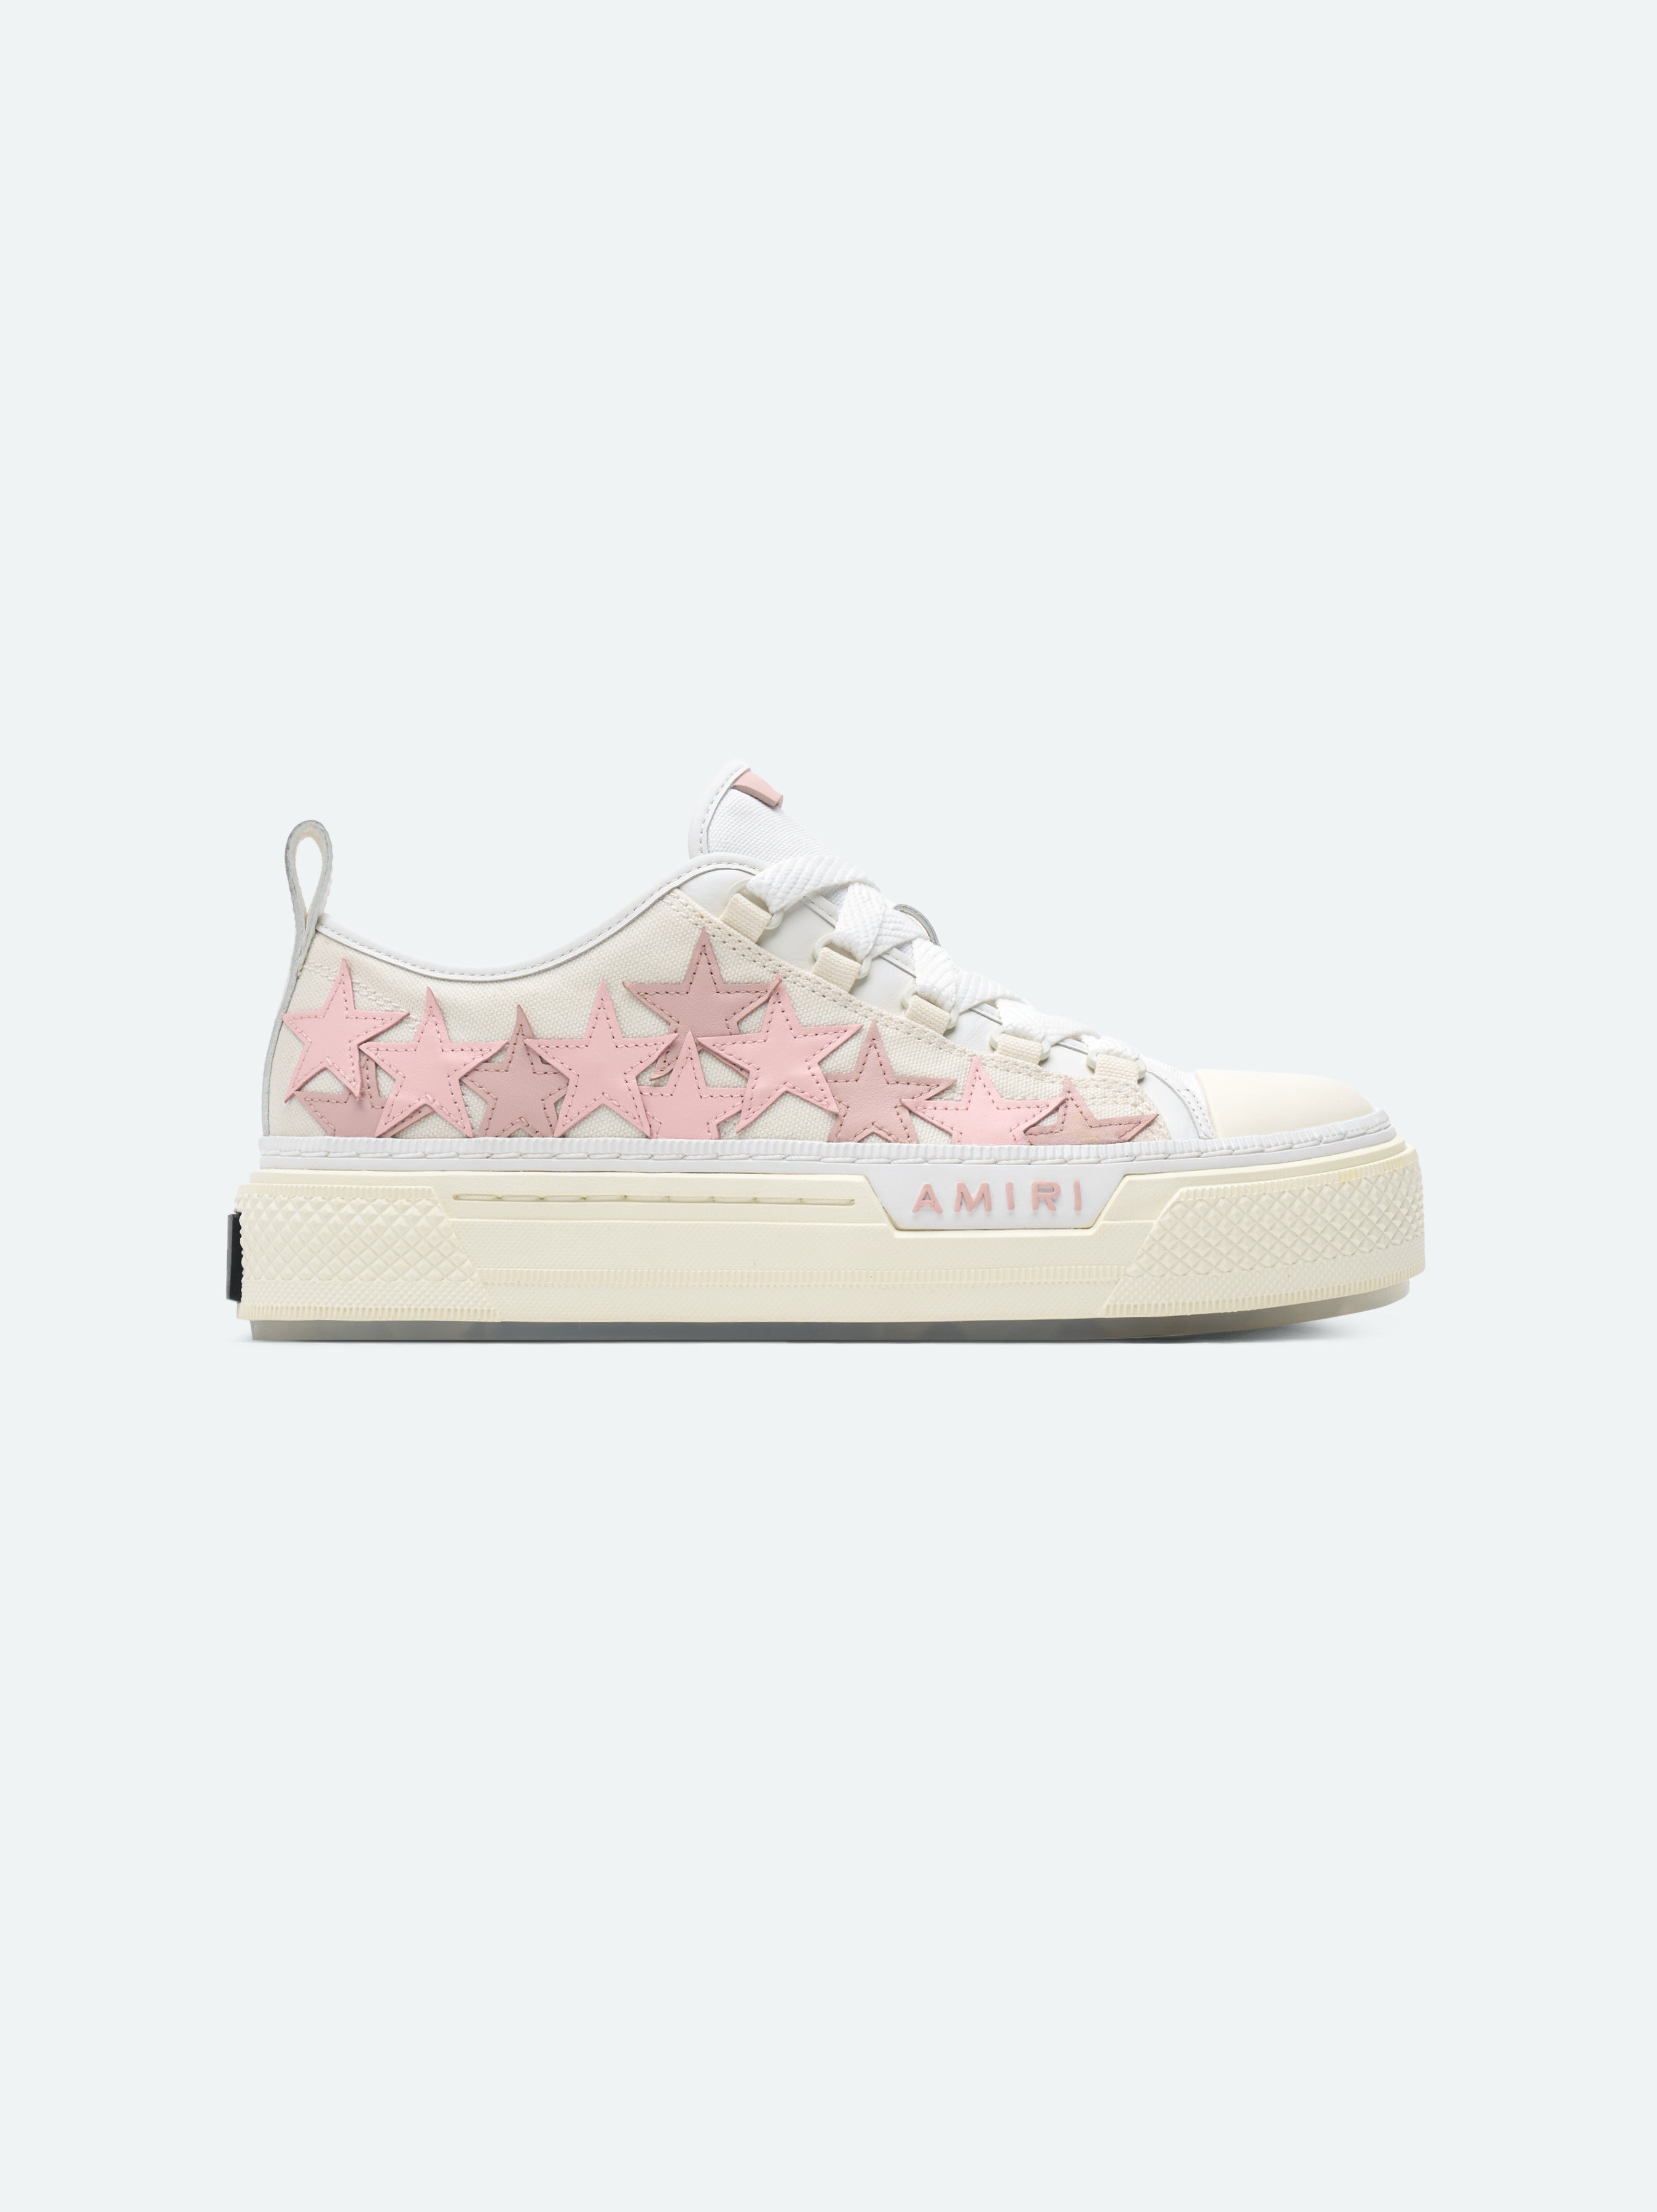 Product WOMEN- STARS COURT LOW - WHITE/PINK featured image